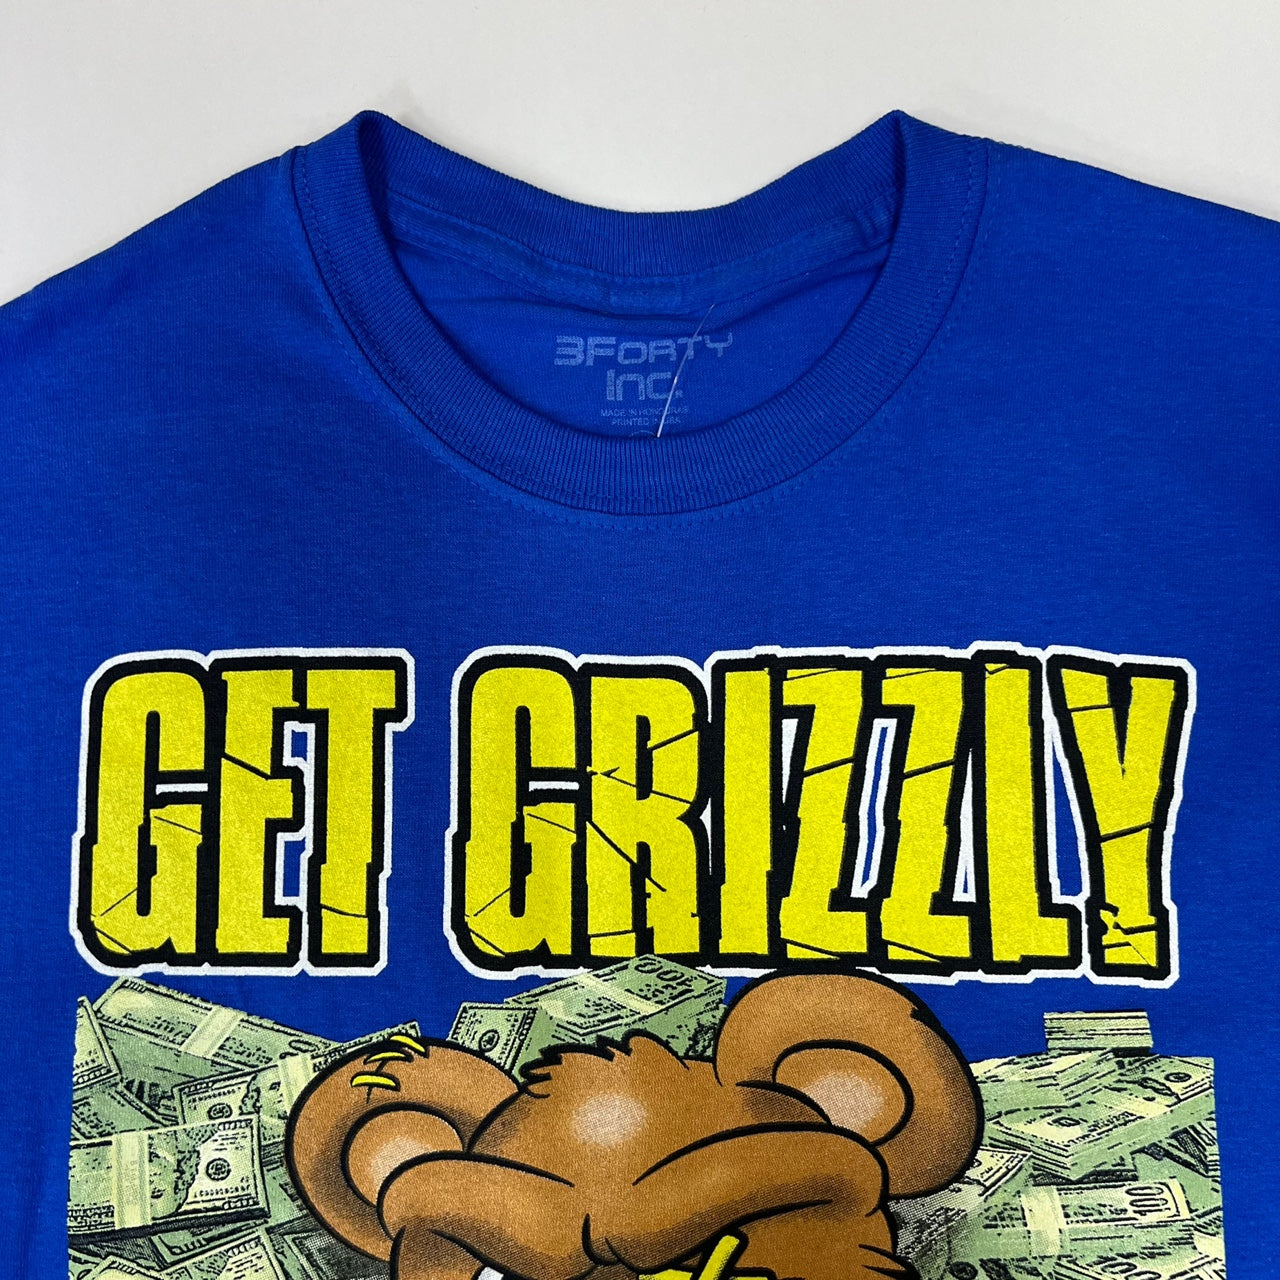 3FORTY Get Grizzly Money Print T-Shirt